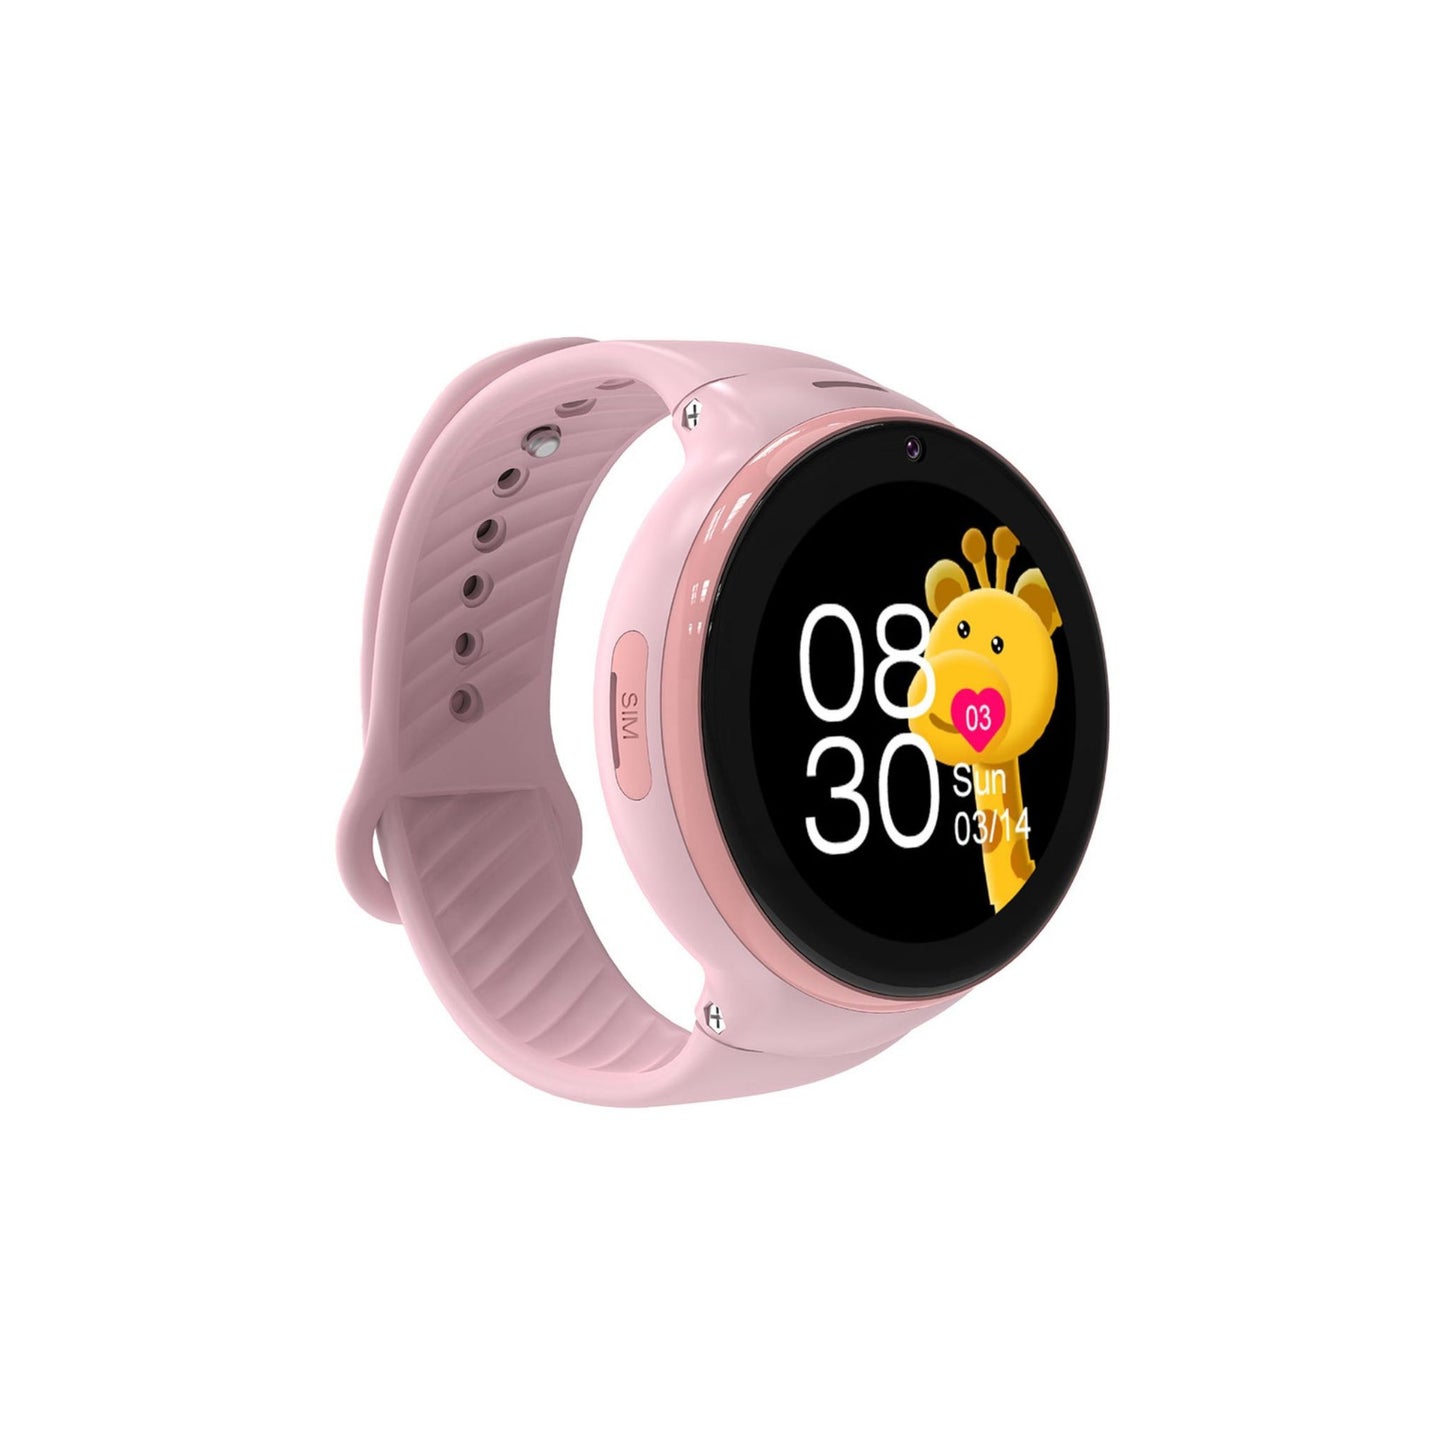 Porodo Kids 4G Smart Watch Android OS With WhatsApp_Pink